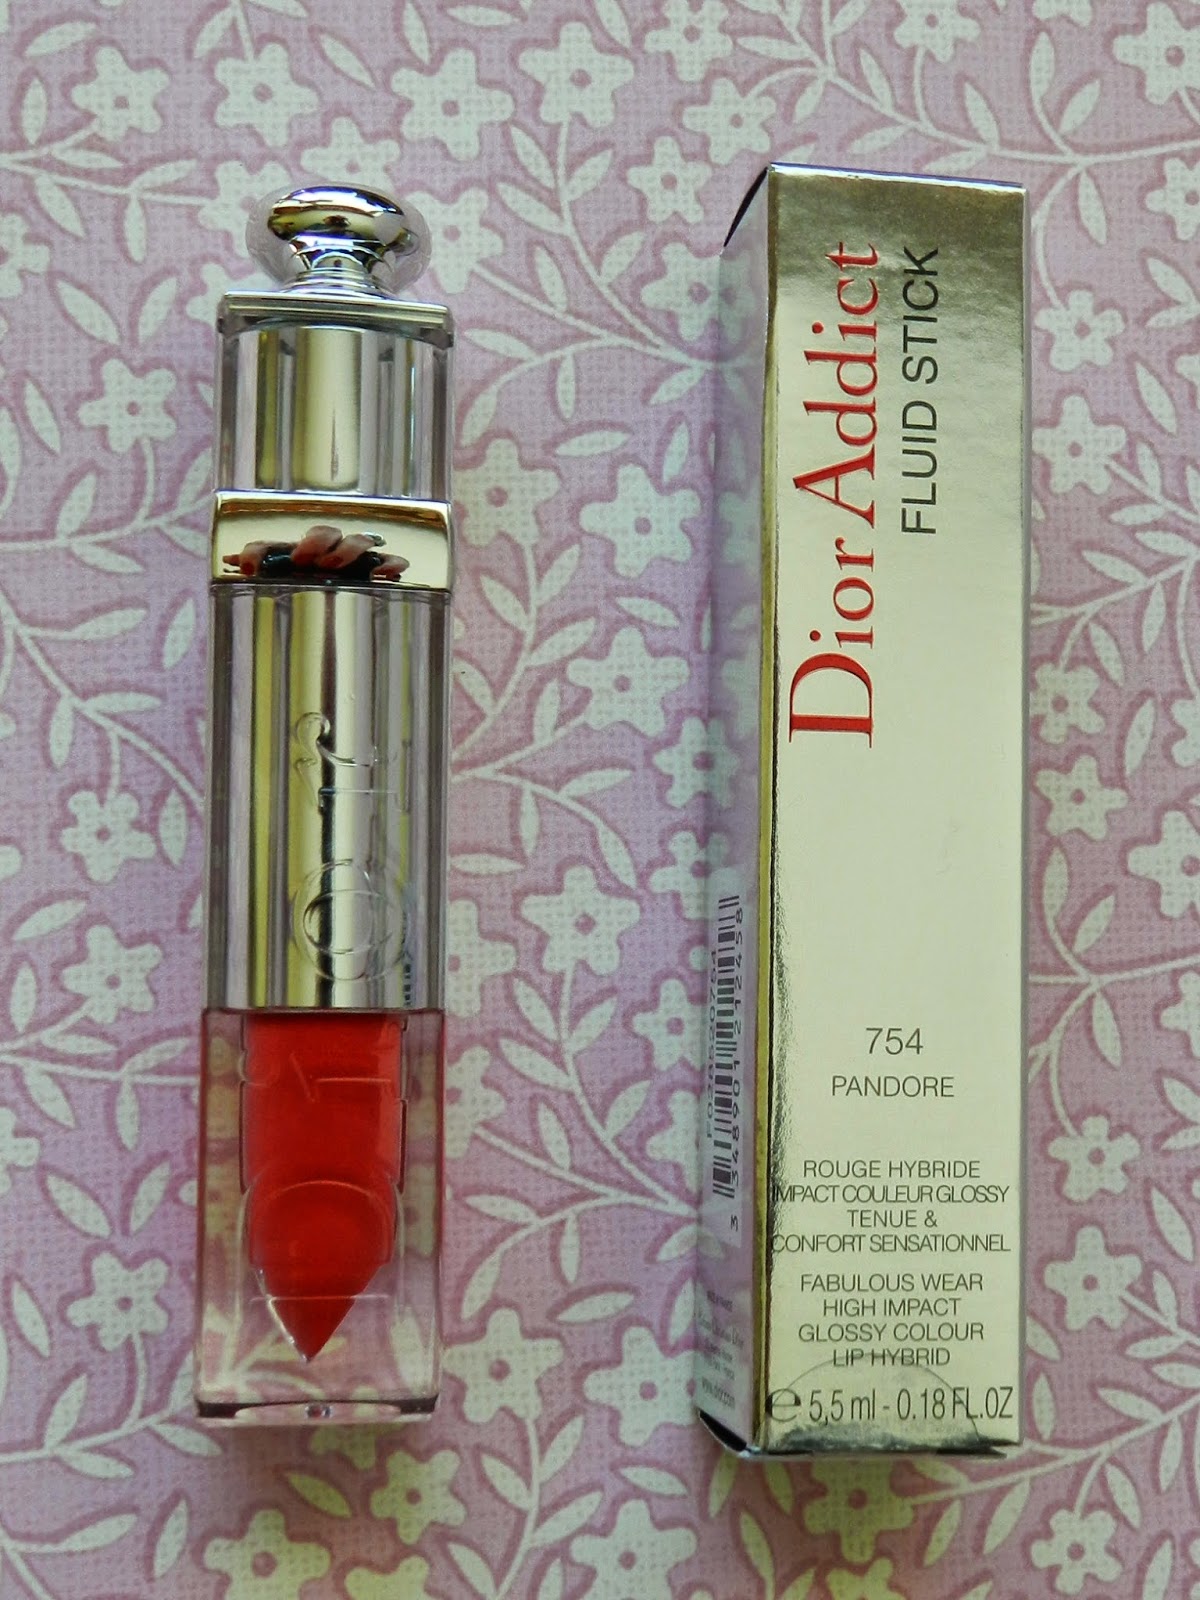 Unfade what fades Dior Addict Fluid Stick in Pandora 754 review, swatches and comparisons